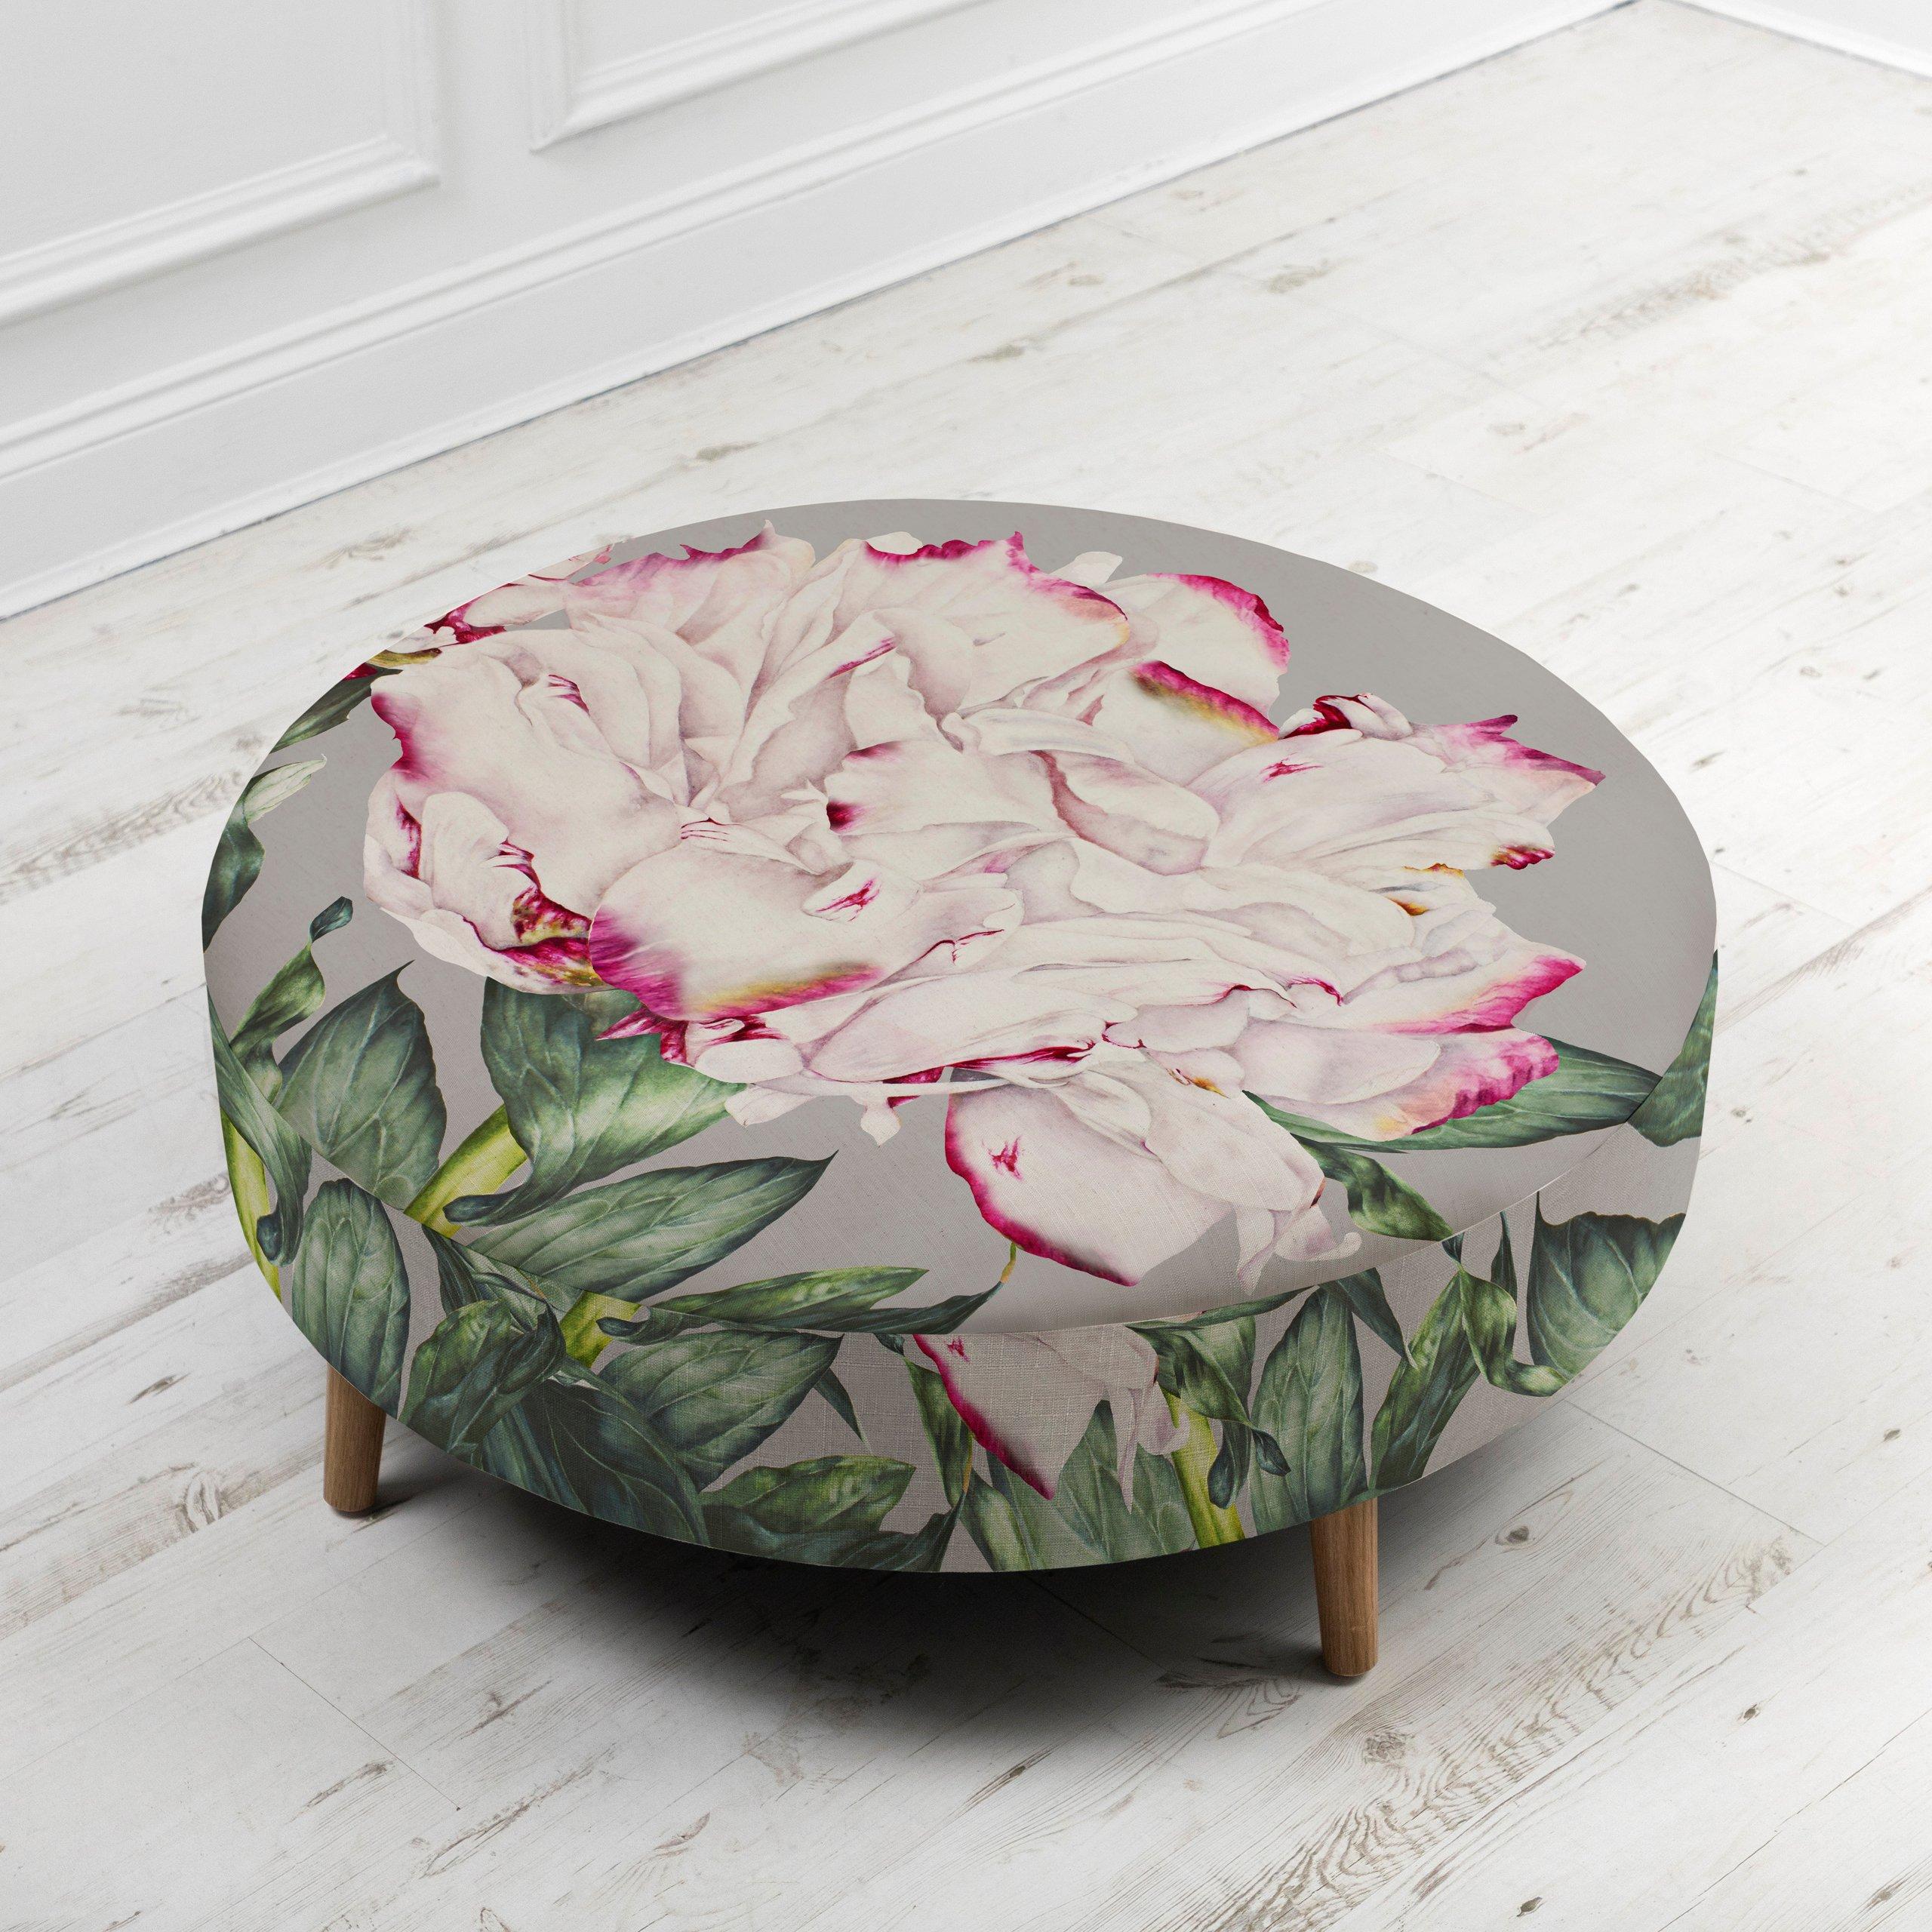 Petra Parcevall Floral Footstool